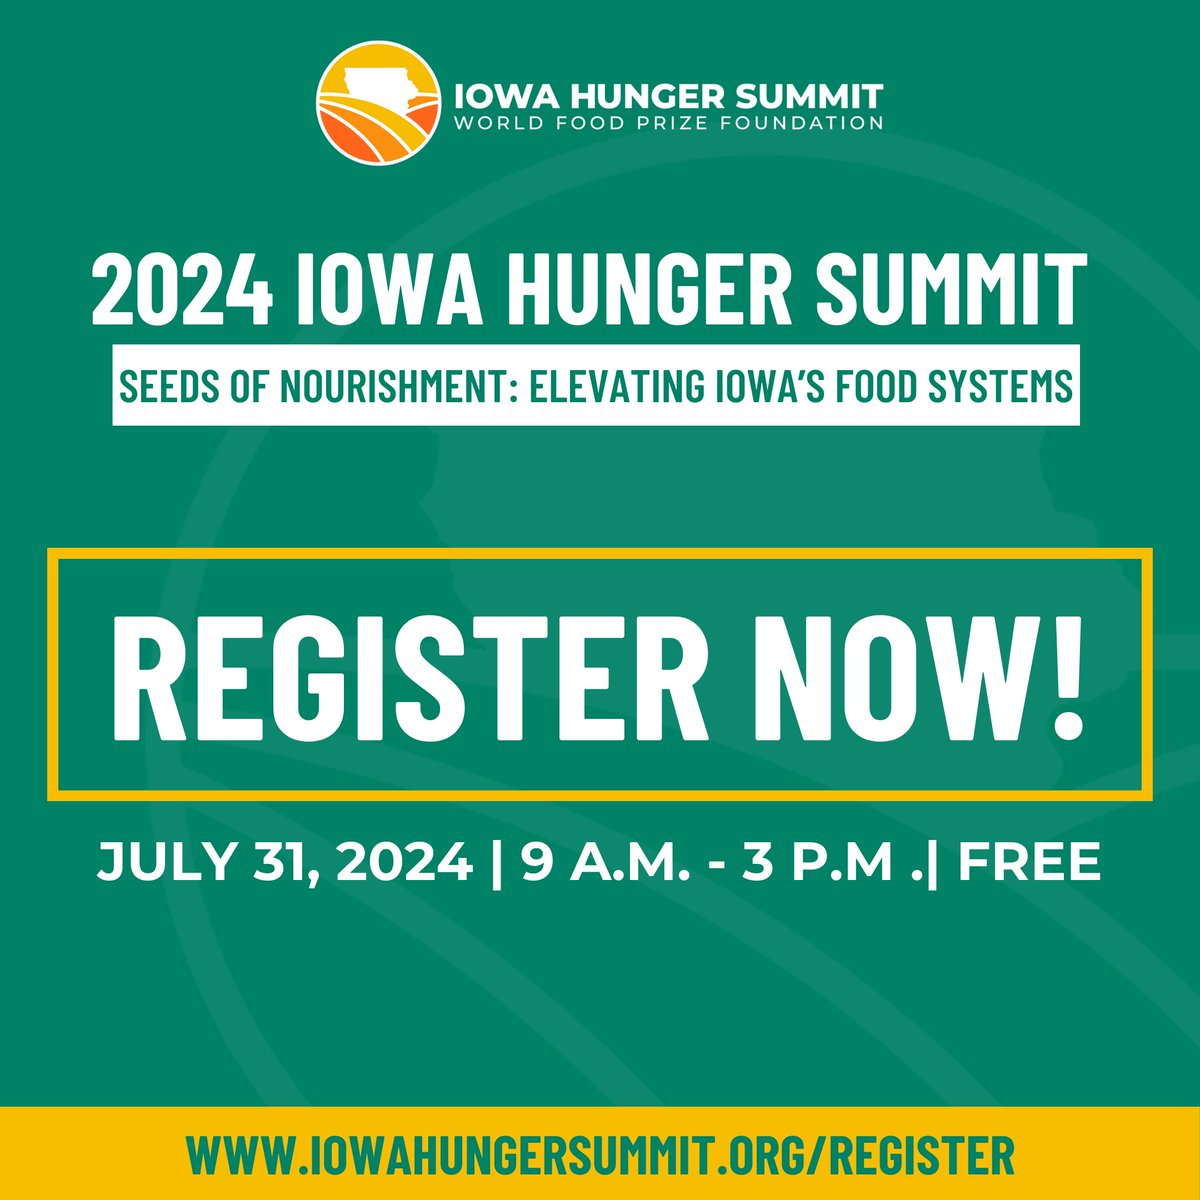 🍏 Passionate about ending hunger? 🥖 Be part of Iowa Hunger Summit, delving into 'Seeds of Nourishment: Elevating Iowa’s Food Systems.' It's FREE at Norman E. Borlaug Hall of Laureates on July 31, 2024! Register now: bit.ly/3WvTnJJ #IHS24 #FoodPrize24 #FoodSecurity